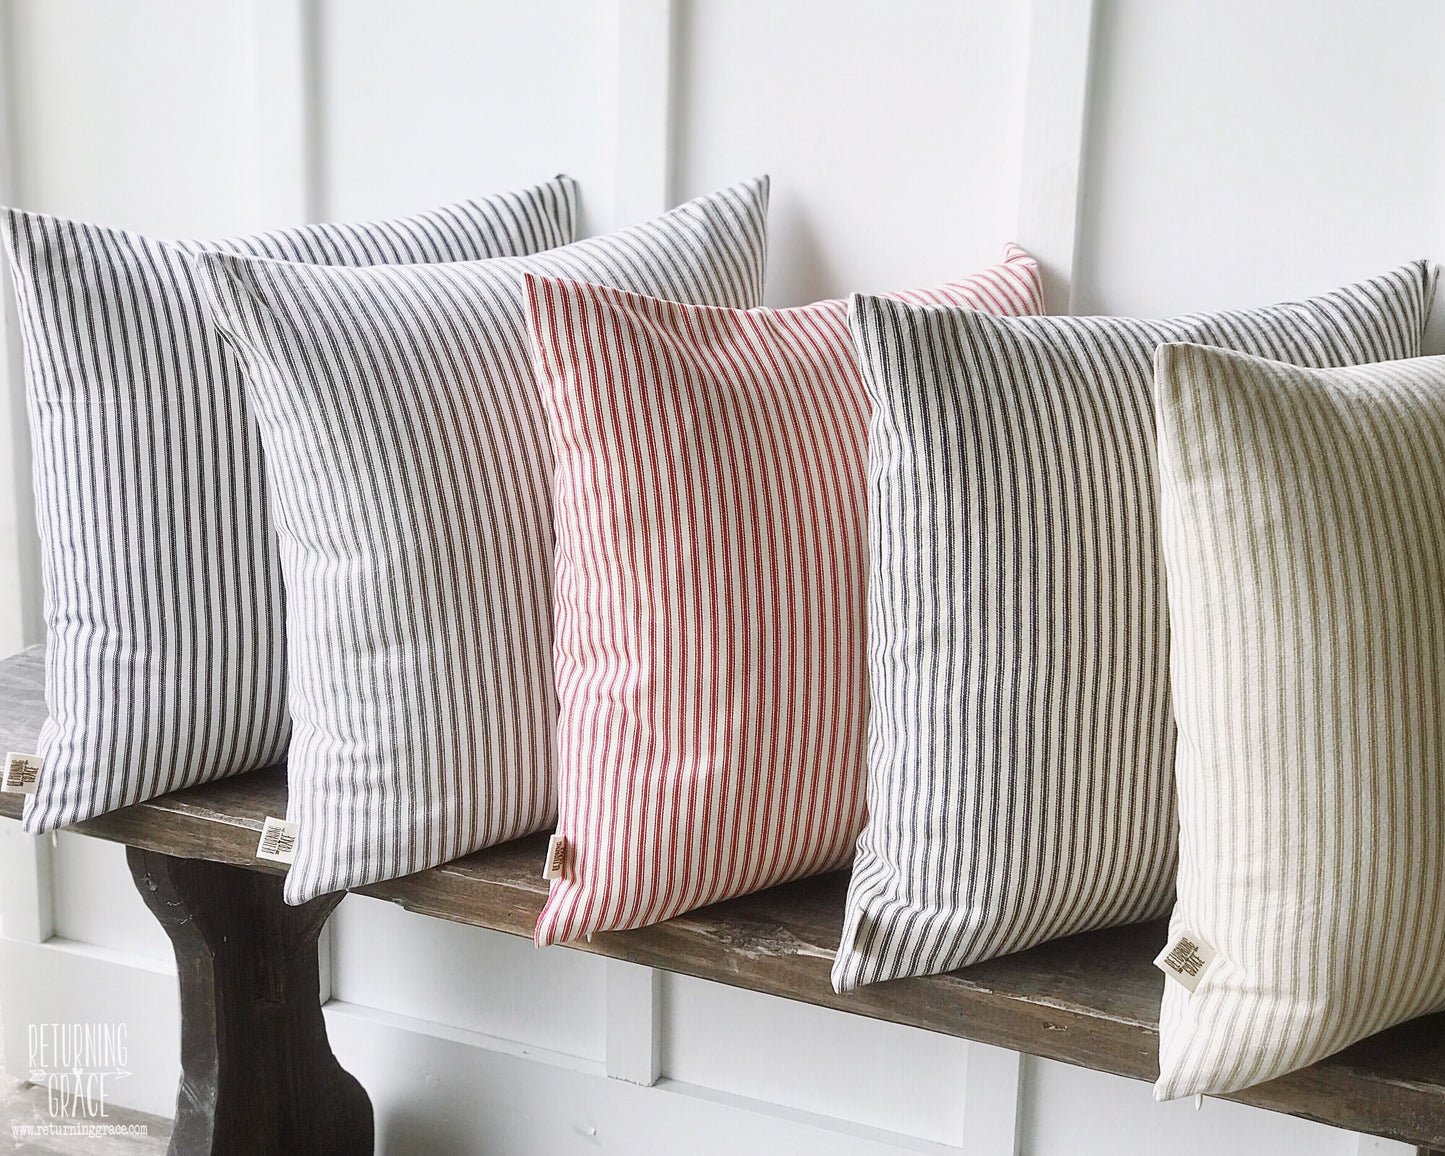 Gray Ticking Pillow Cover - Returning Grace Designs